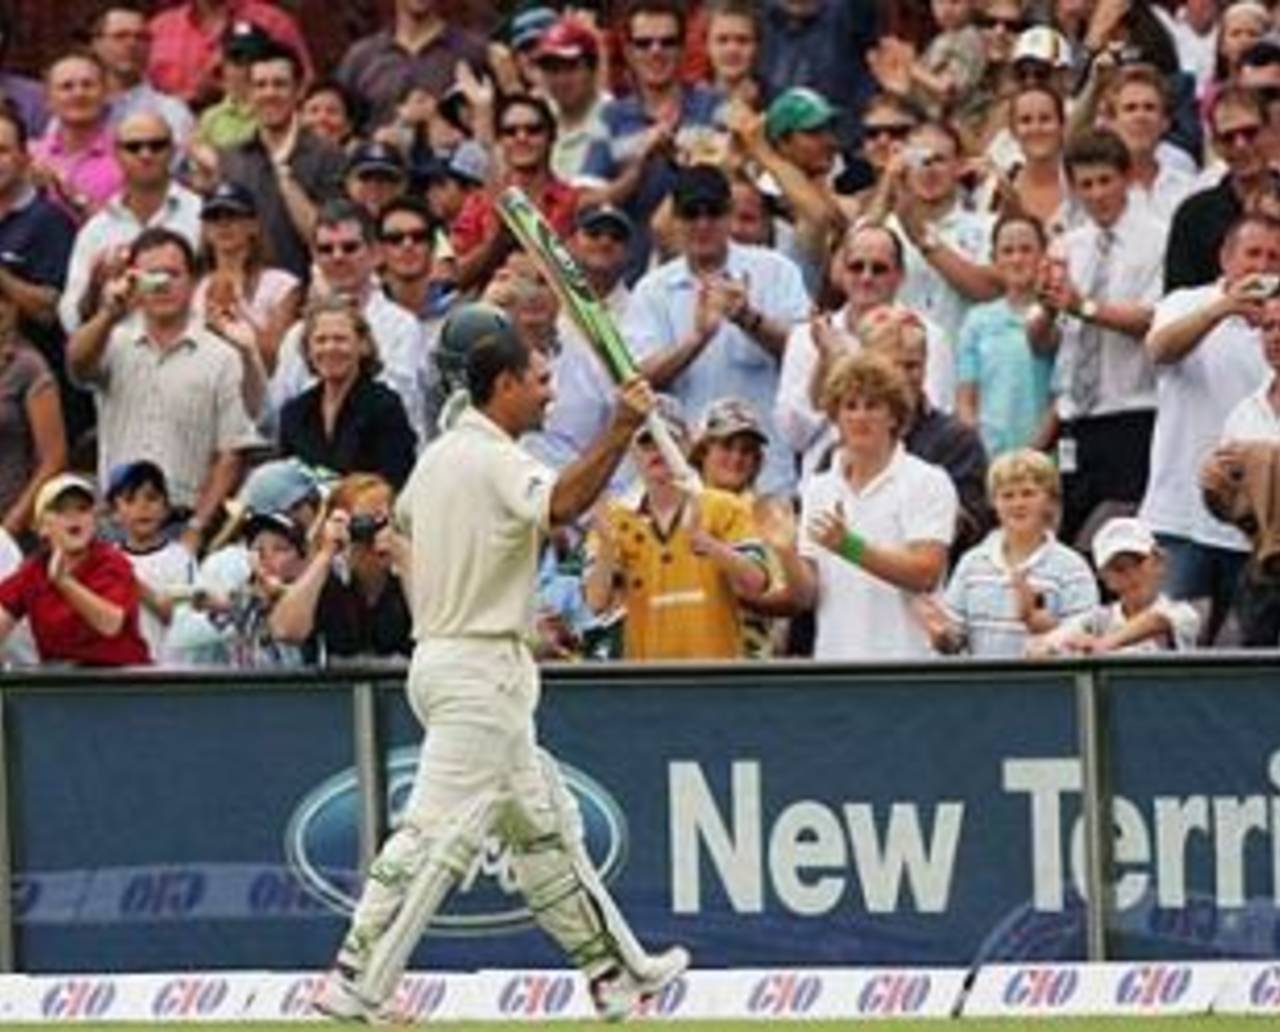 Ricky Ponting receives a standing ovation after hitting the winning runs for Australia, South Africa in Australia, 2005-06